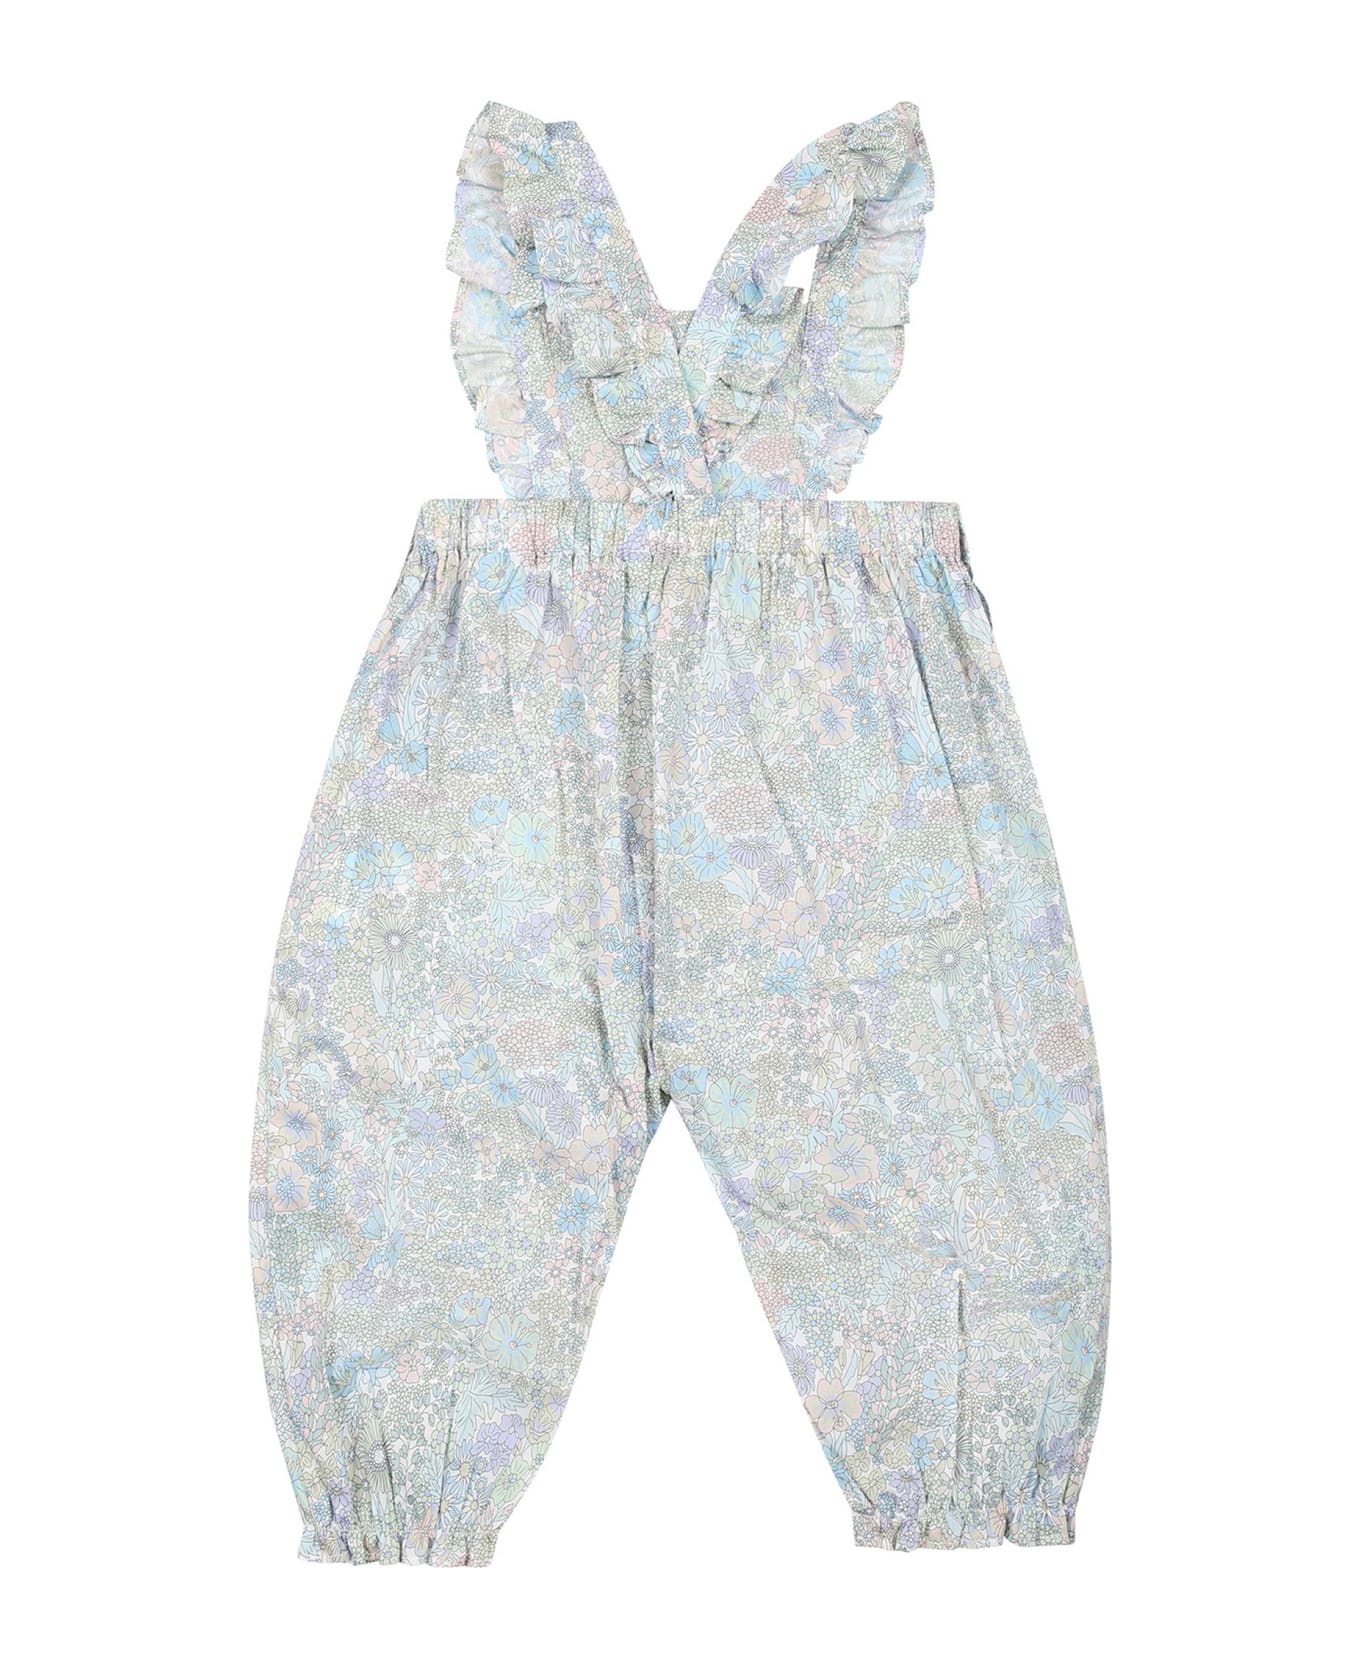 Tartine et Chocolat Light Blue Cotton Dungarees For Baby Girl With Floral Print - Light Blue